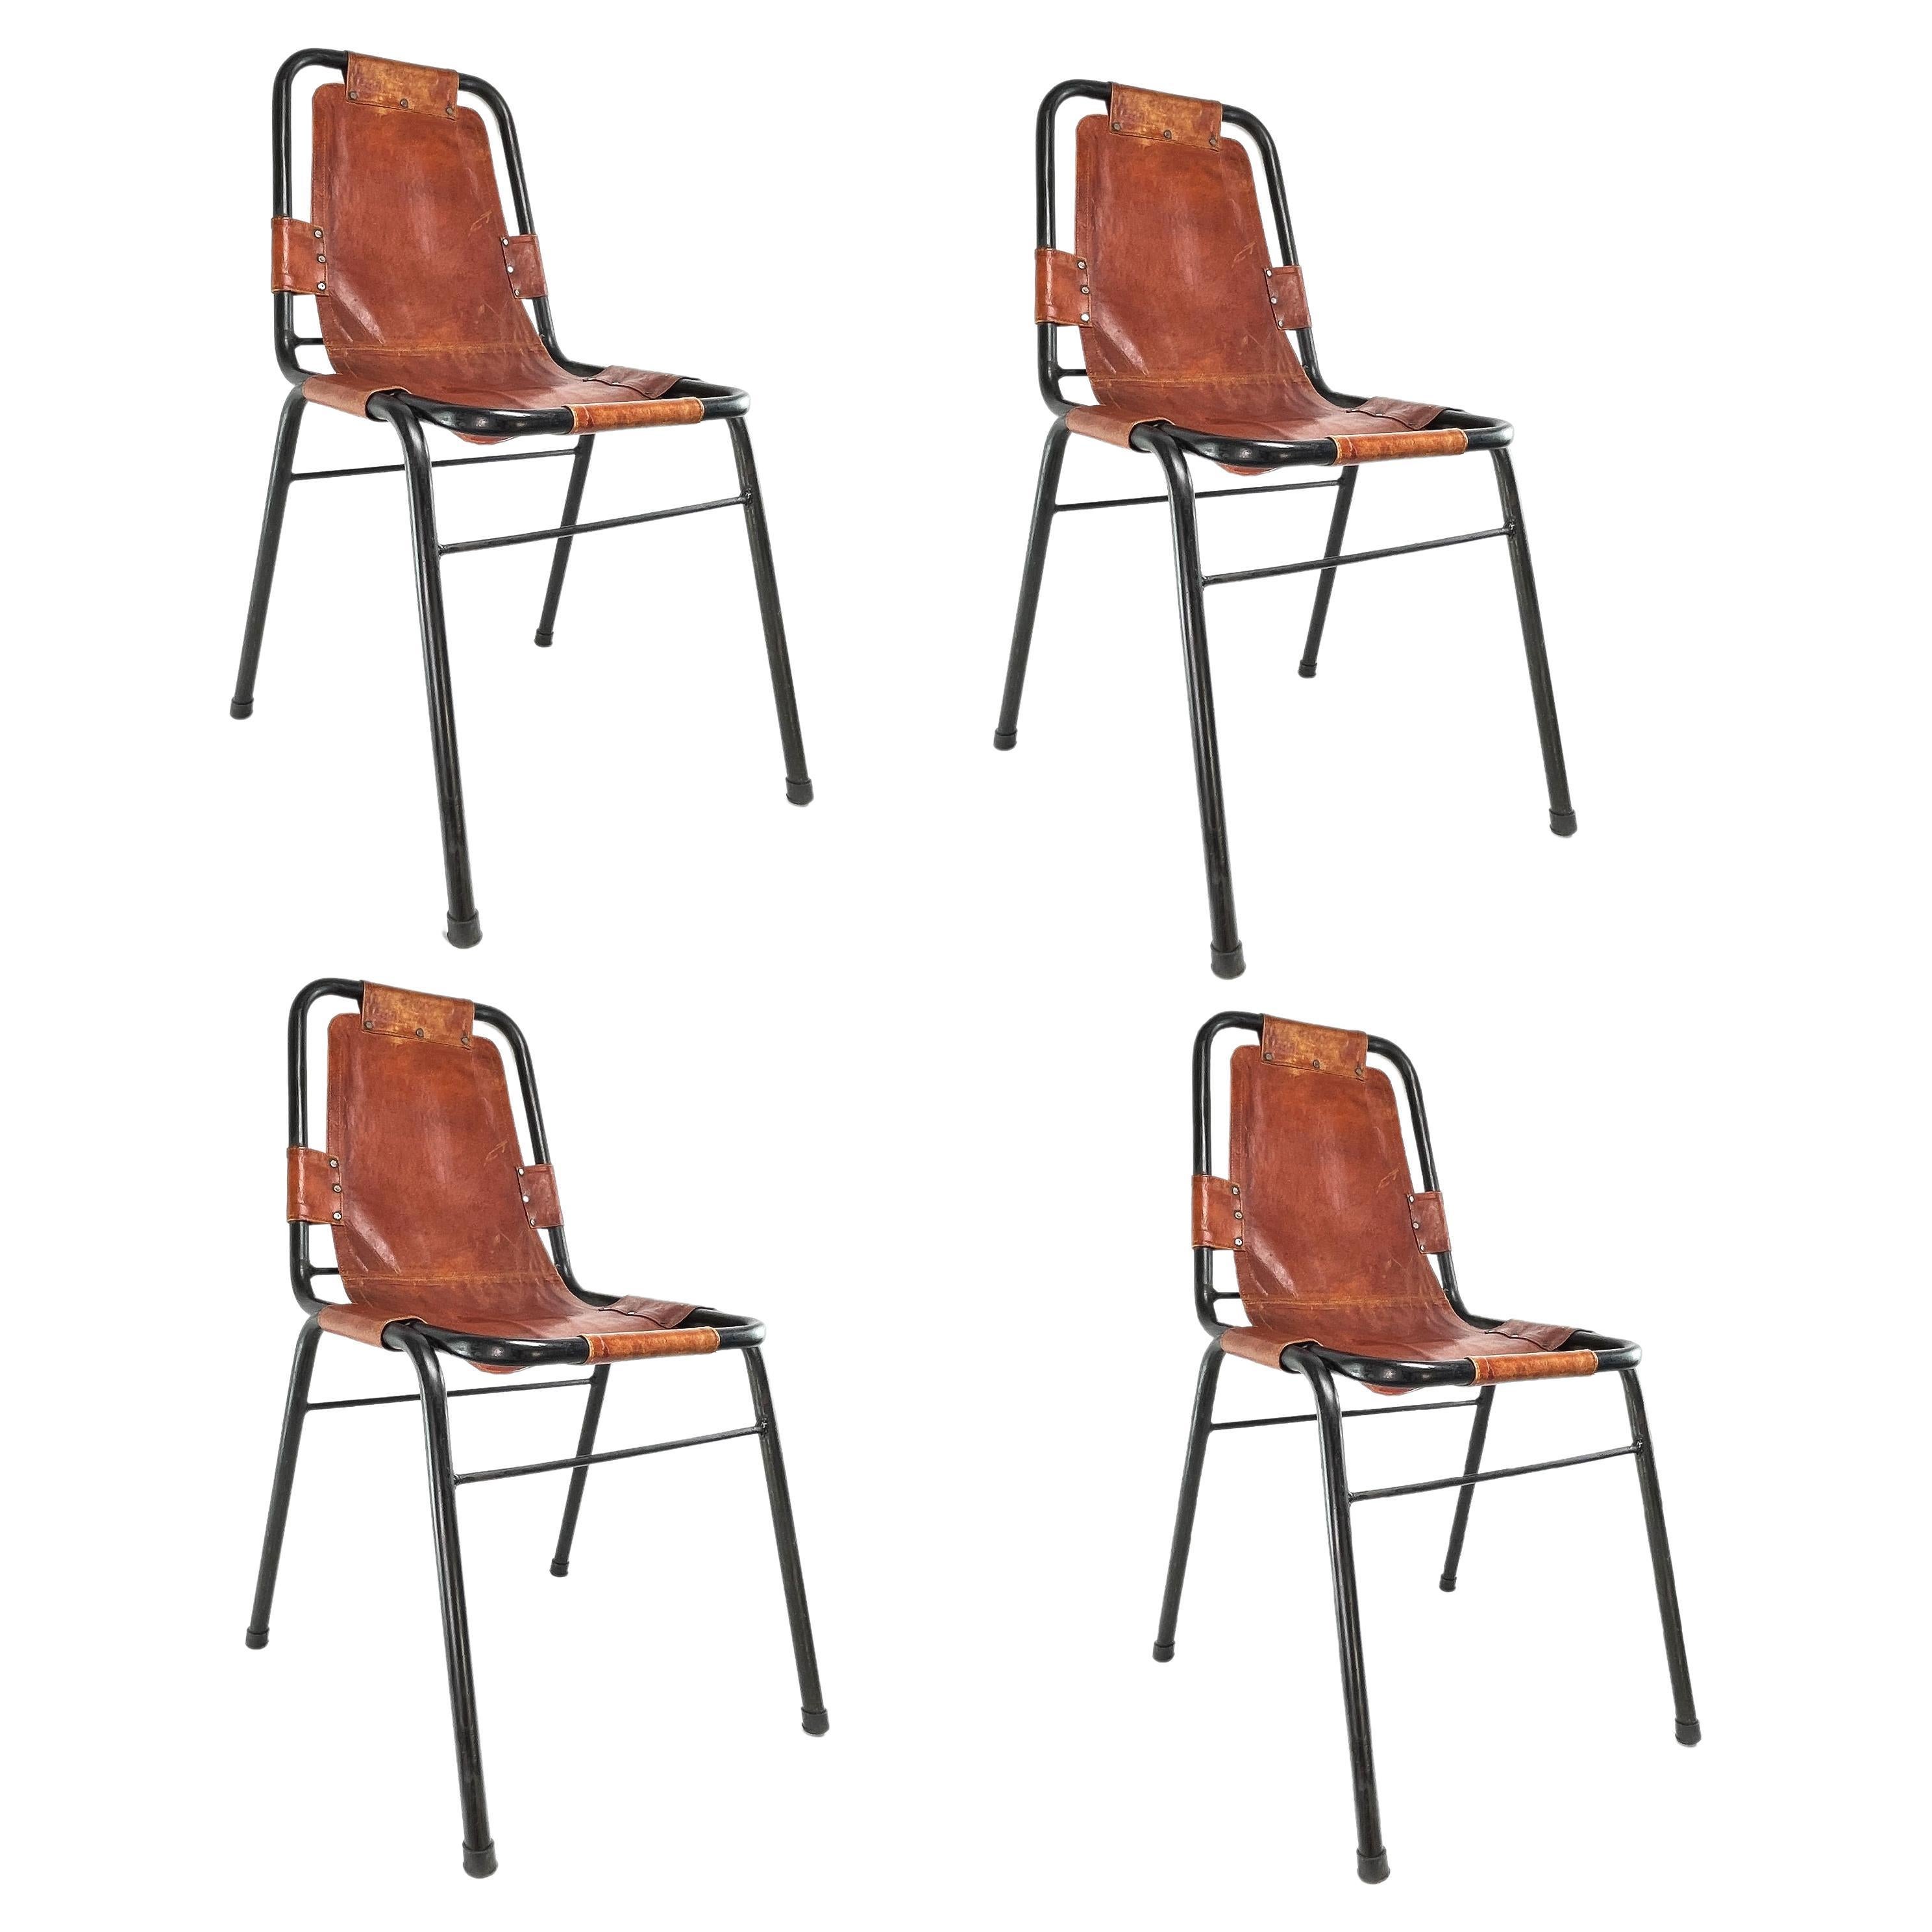 1 of 4 Les Arcs Chair by Dal Vera selected by Charlotte Perriand, 1960s For Sale